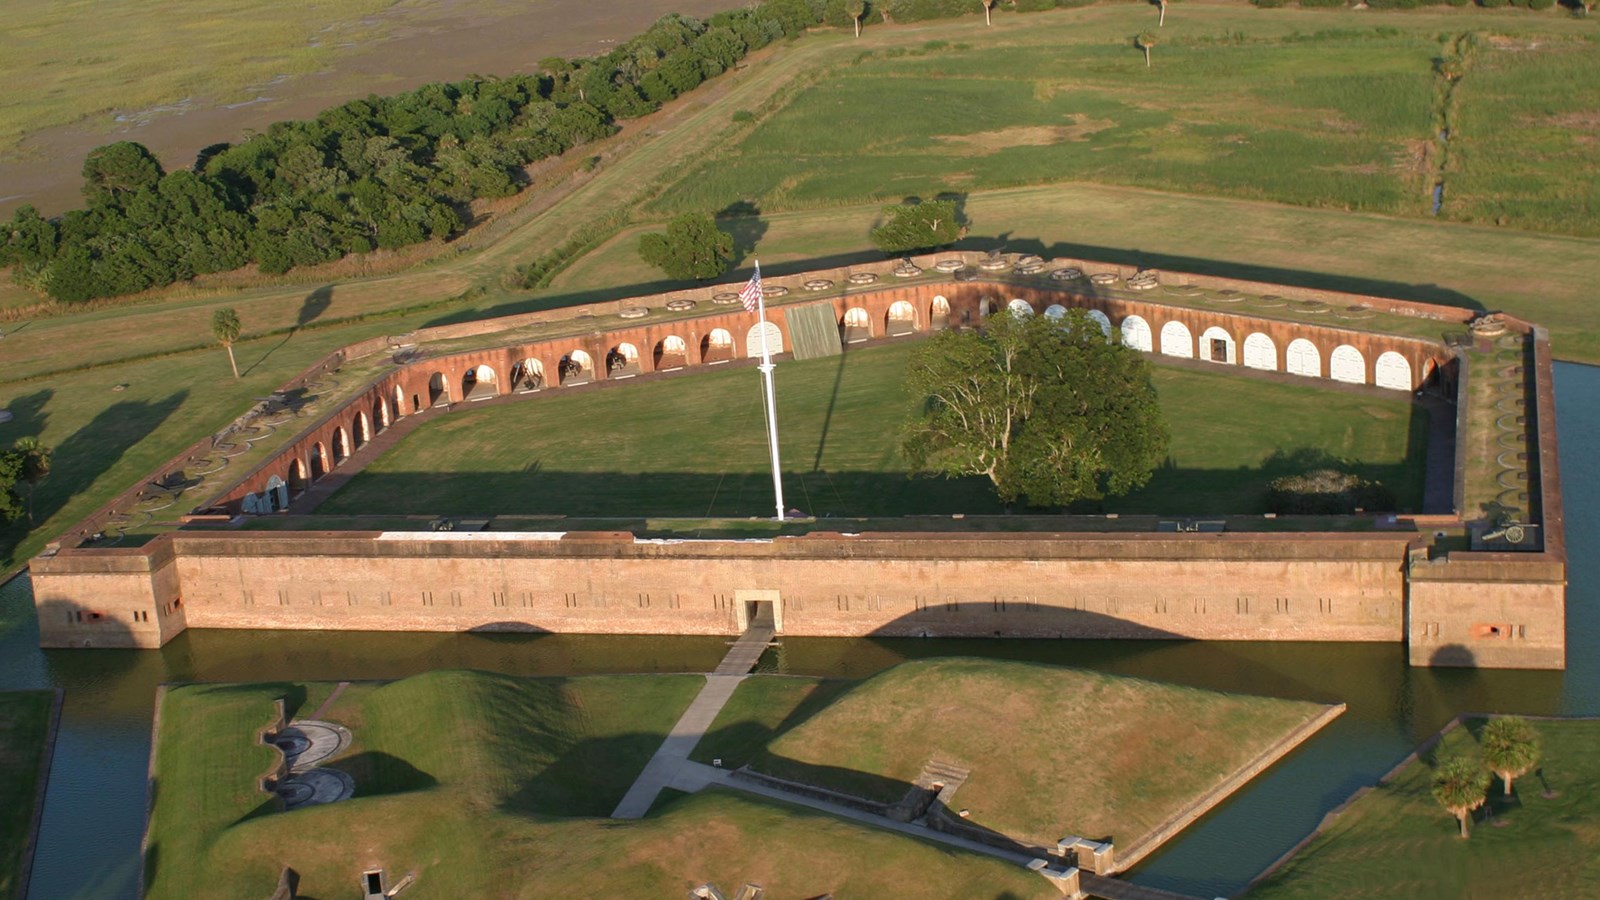 In this aerial view of Fort Pulaski you can see the 5 walls of brick that make up the fort.  